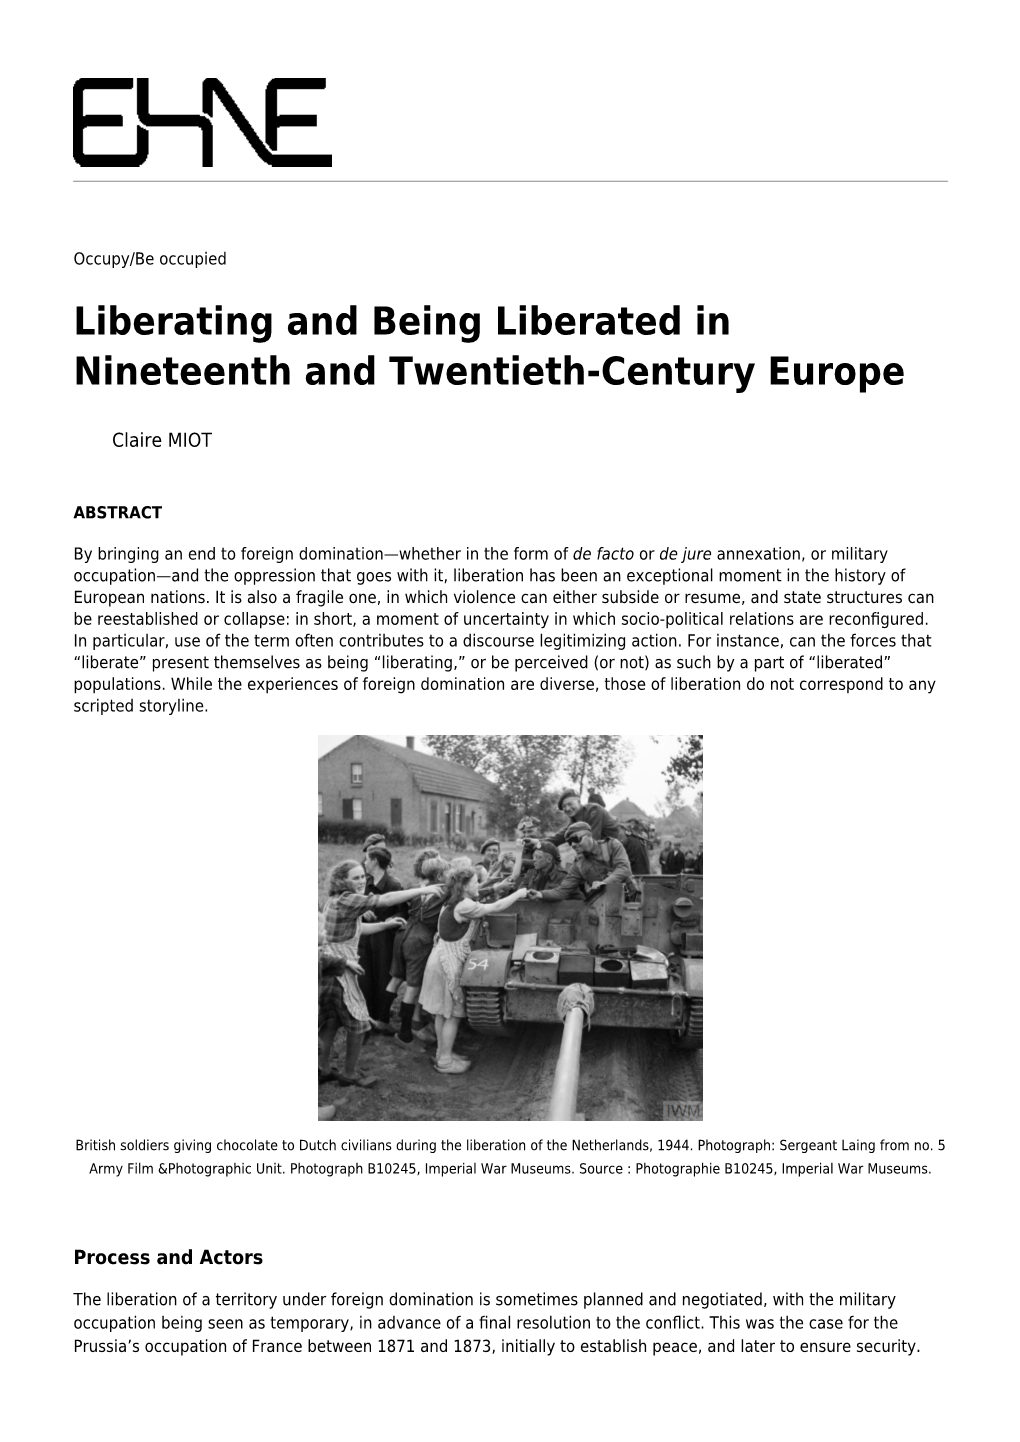 Liberating and Being Liberated in Nineteenth and Twentieth-Century Europe